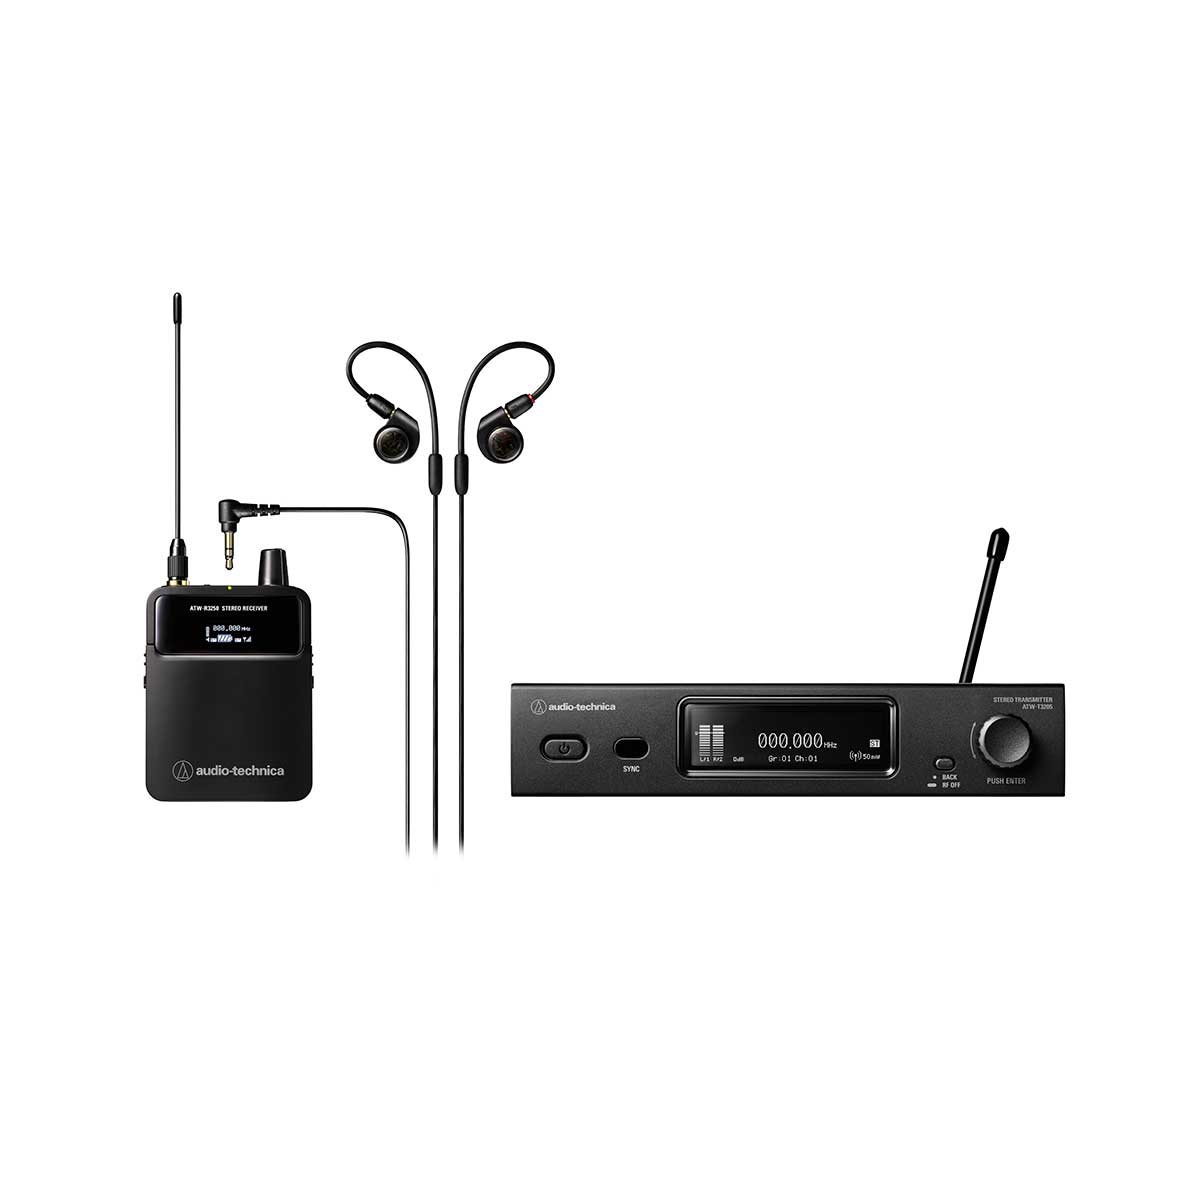 Audio-Technica 3000 Series In-Ear Monitor System: ATW-R3250 Receiver + ATW-T3205 Transmitter + ATH-E40 Professional In-Ear Headphones